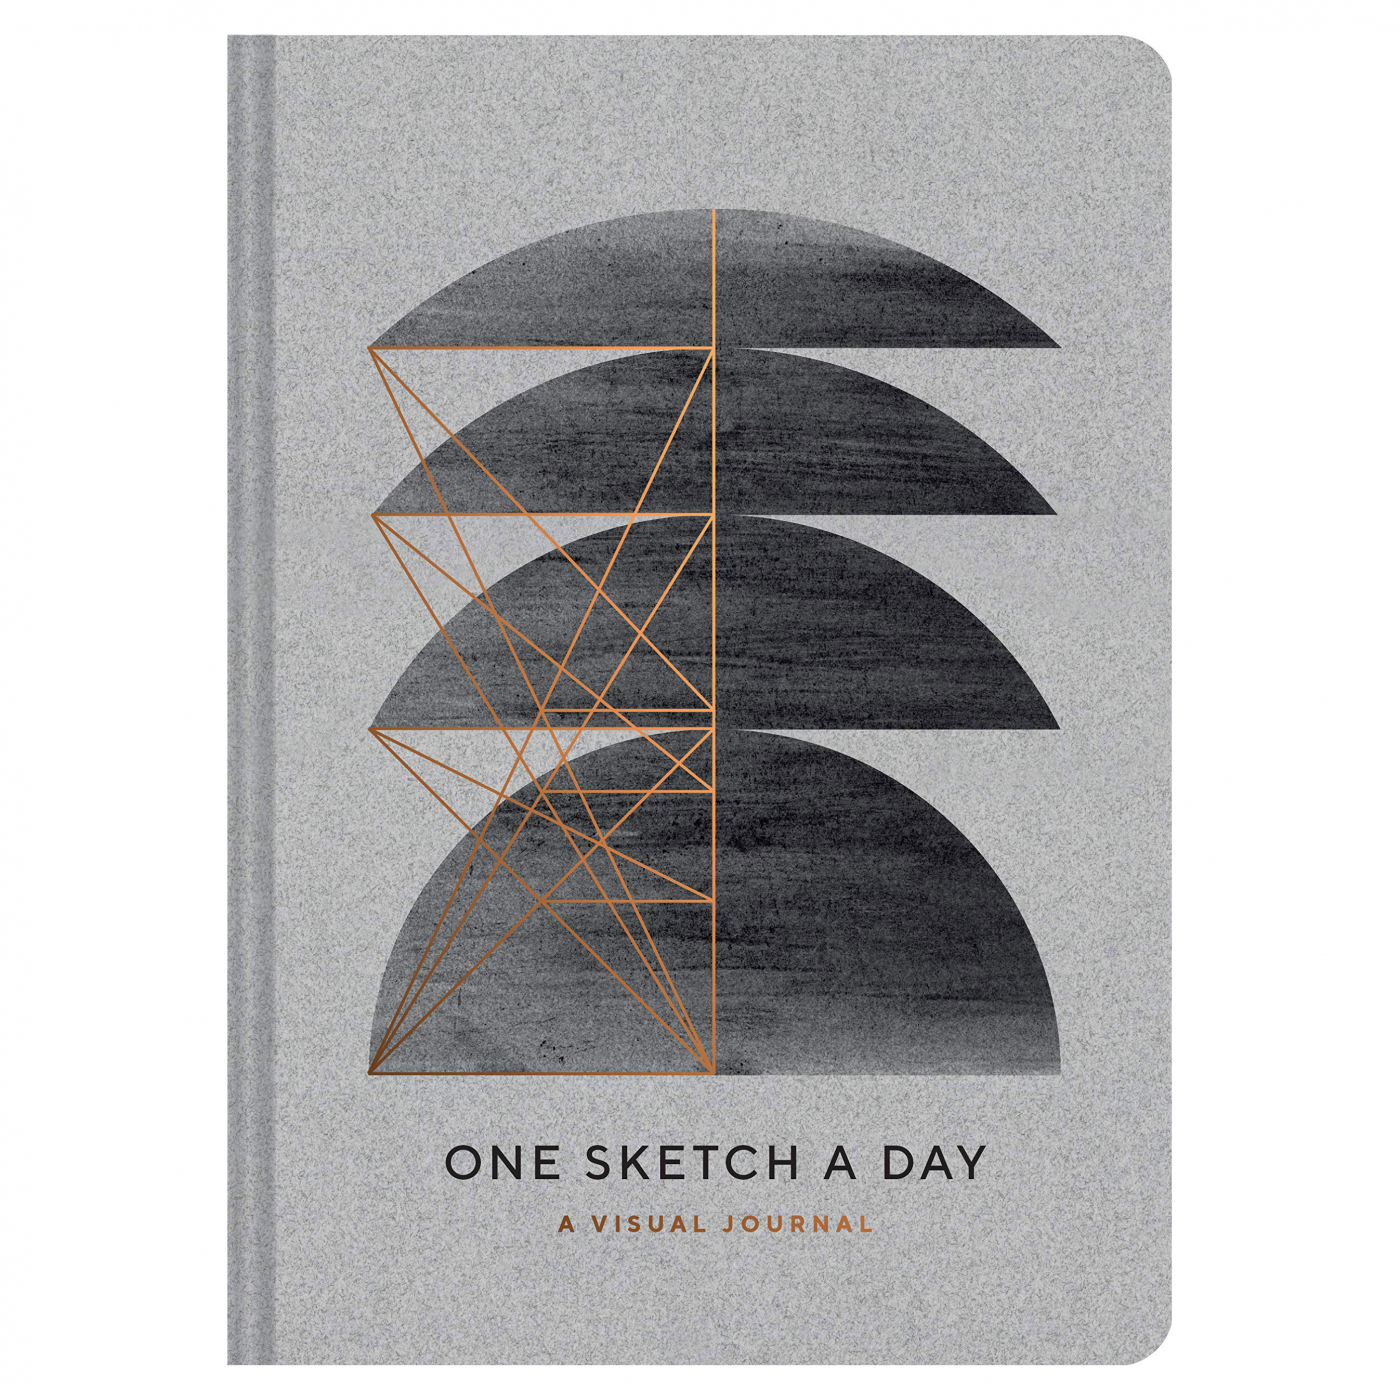 ONE SKETCH A DAY: 25 IMAGES by YUVA RANI | Goodreads